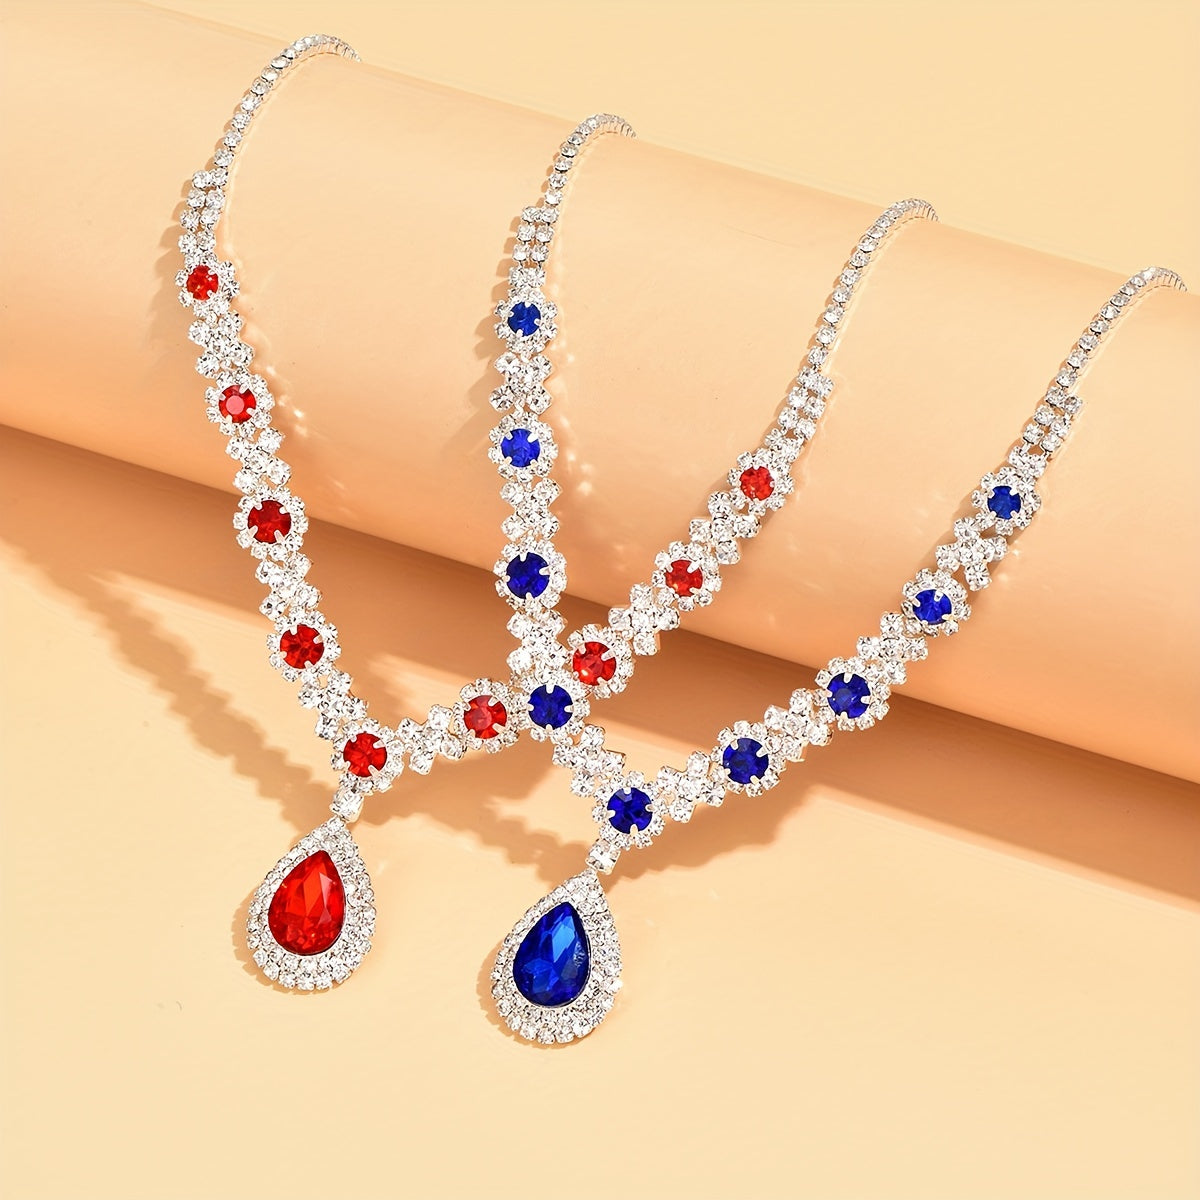 Stunning Wedding Jewelry Set with Sparkling Synthetic Gems - Pendant Necklace and Dangle Earrings